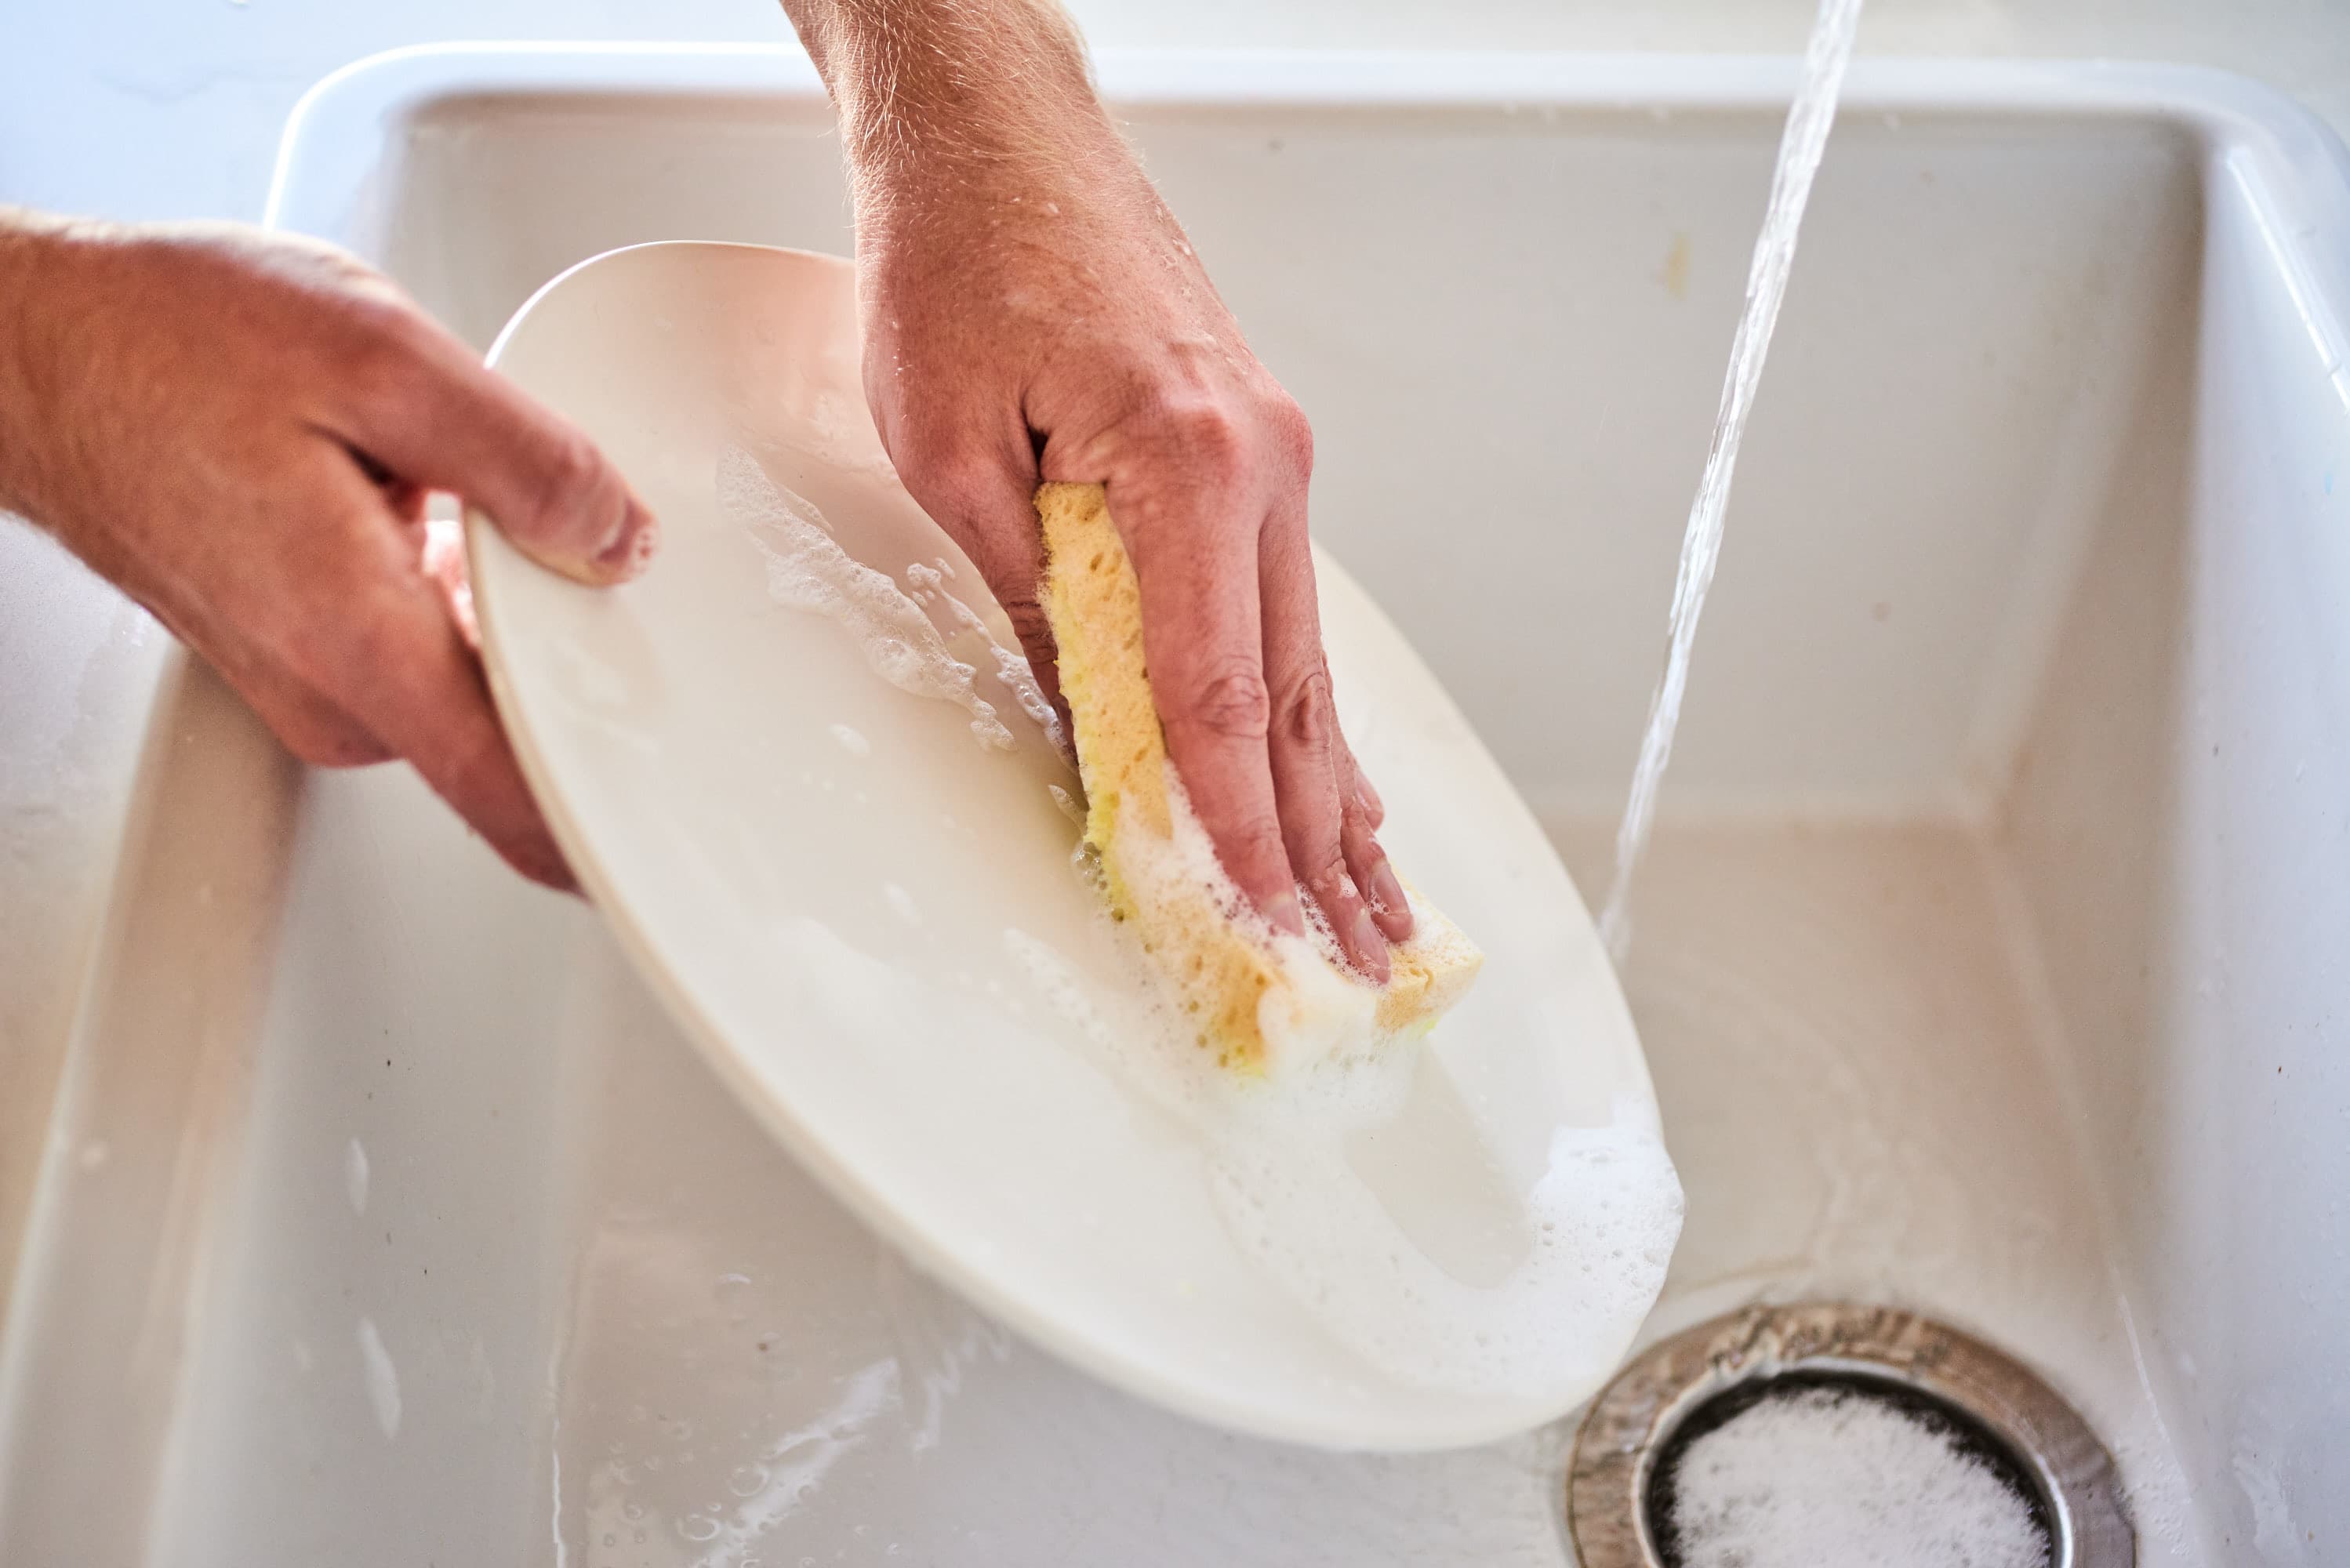 https://cdn.apartmenttherapy.info/image/upload/v1575304247/k/Photo/Lifestyle/2019-12-The-Free-Easy-Way-To-Make-Your-Sponge-Less-Gross/2019-11-25_Kitchn_94728_Lifestyle-The-Free-Easy-Way-To-Make-Your-Sponge-Less-Gross_1.jpg